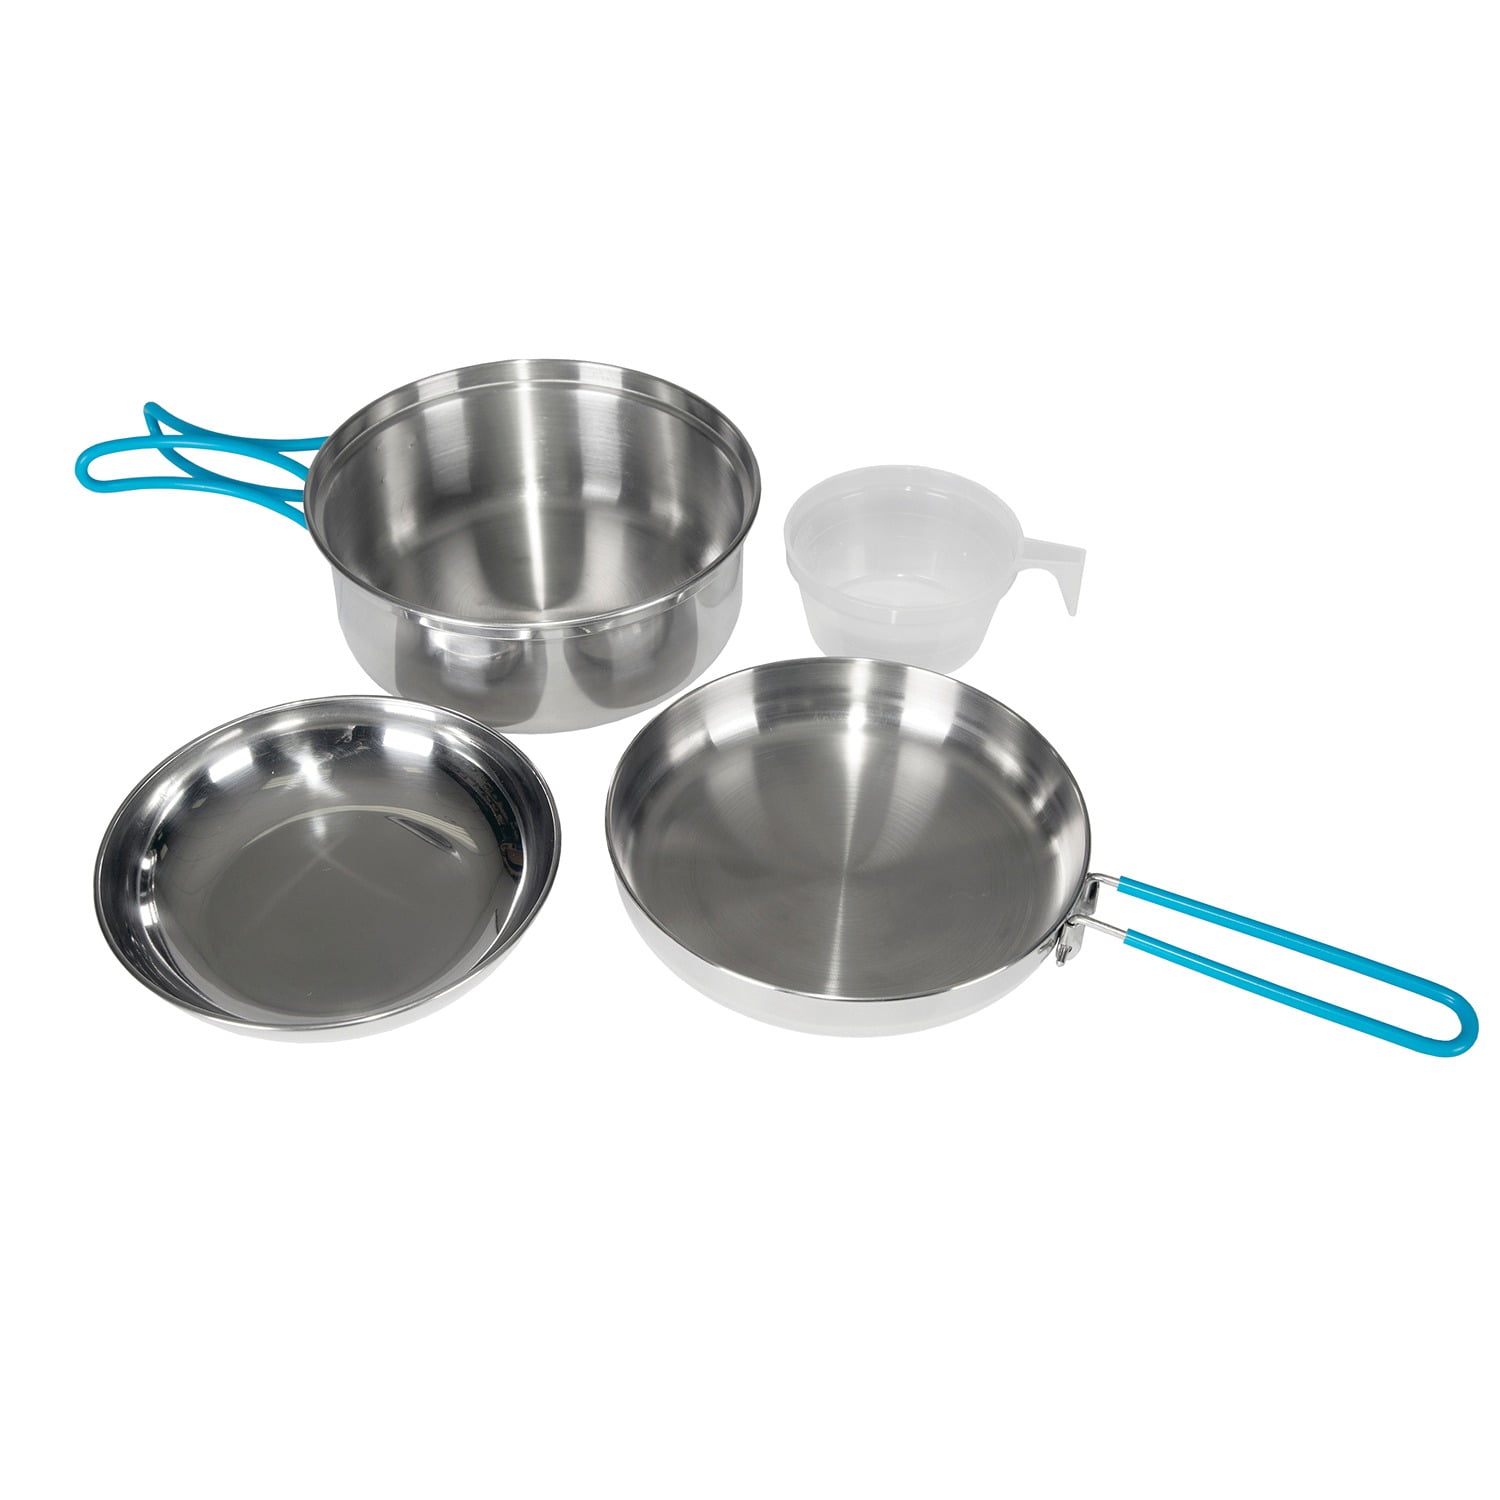 Stainless Steel Mess Kit for Camping,Backpacking & Outdoors Stansport